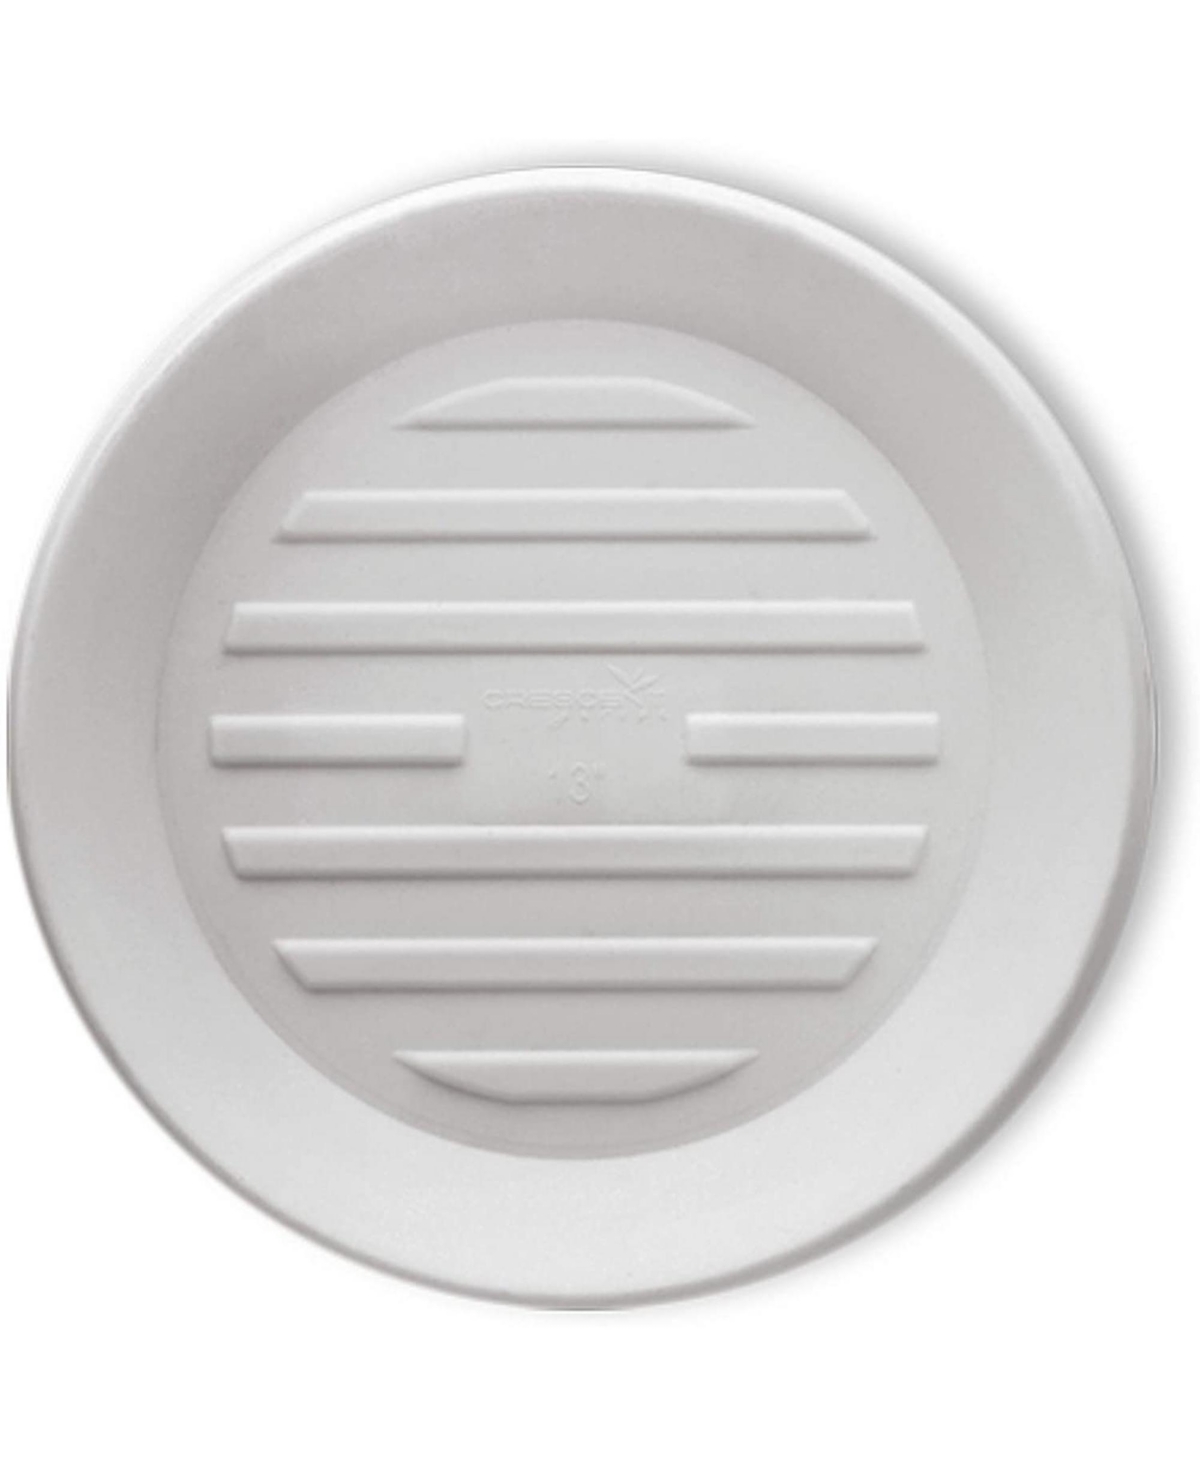 Univ Round Saucer for Potted Plants, Alpine White 10in - White